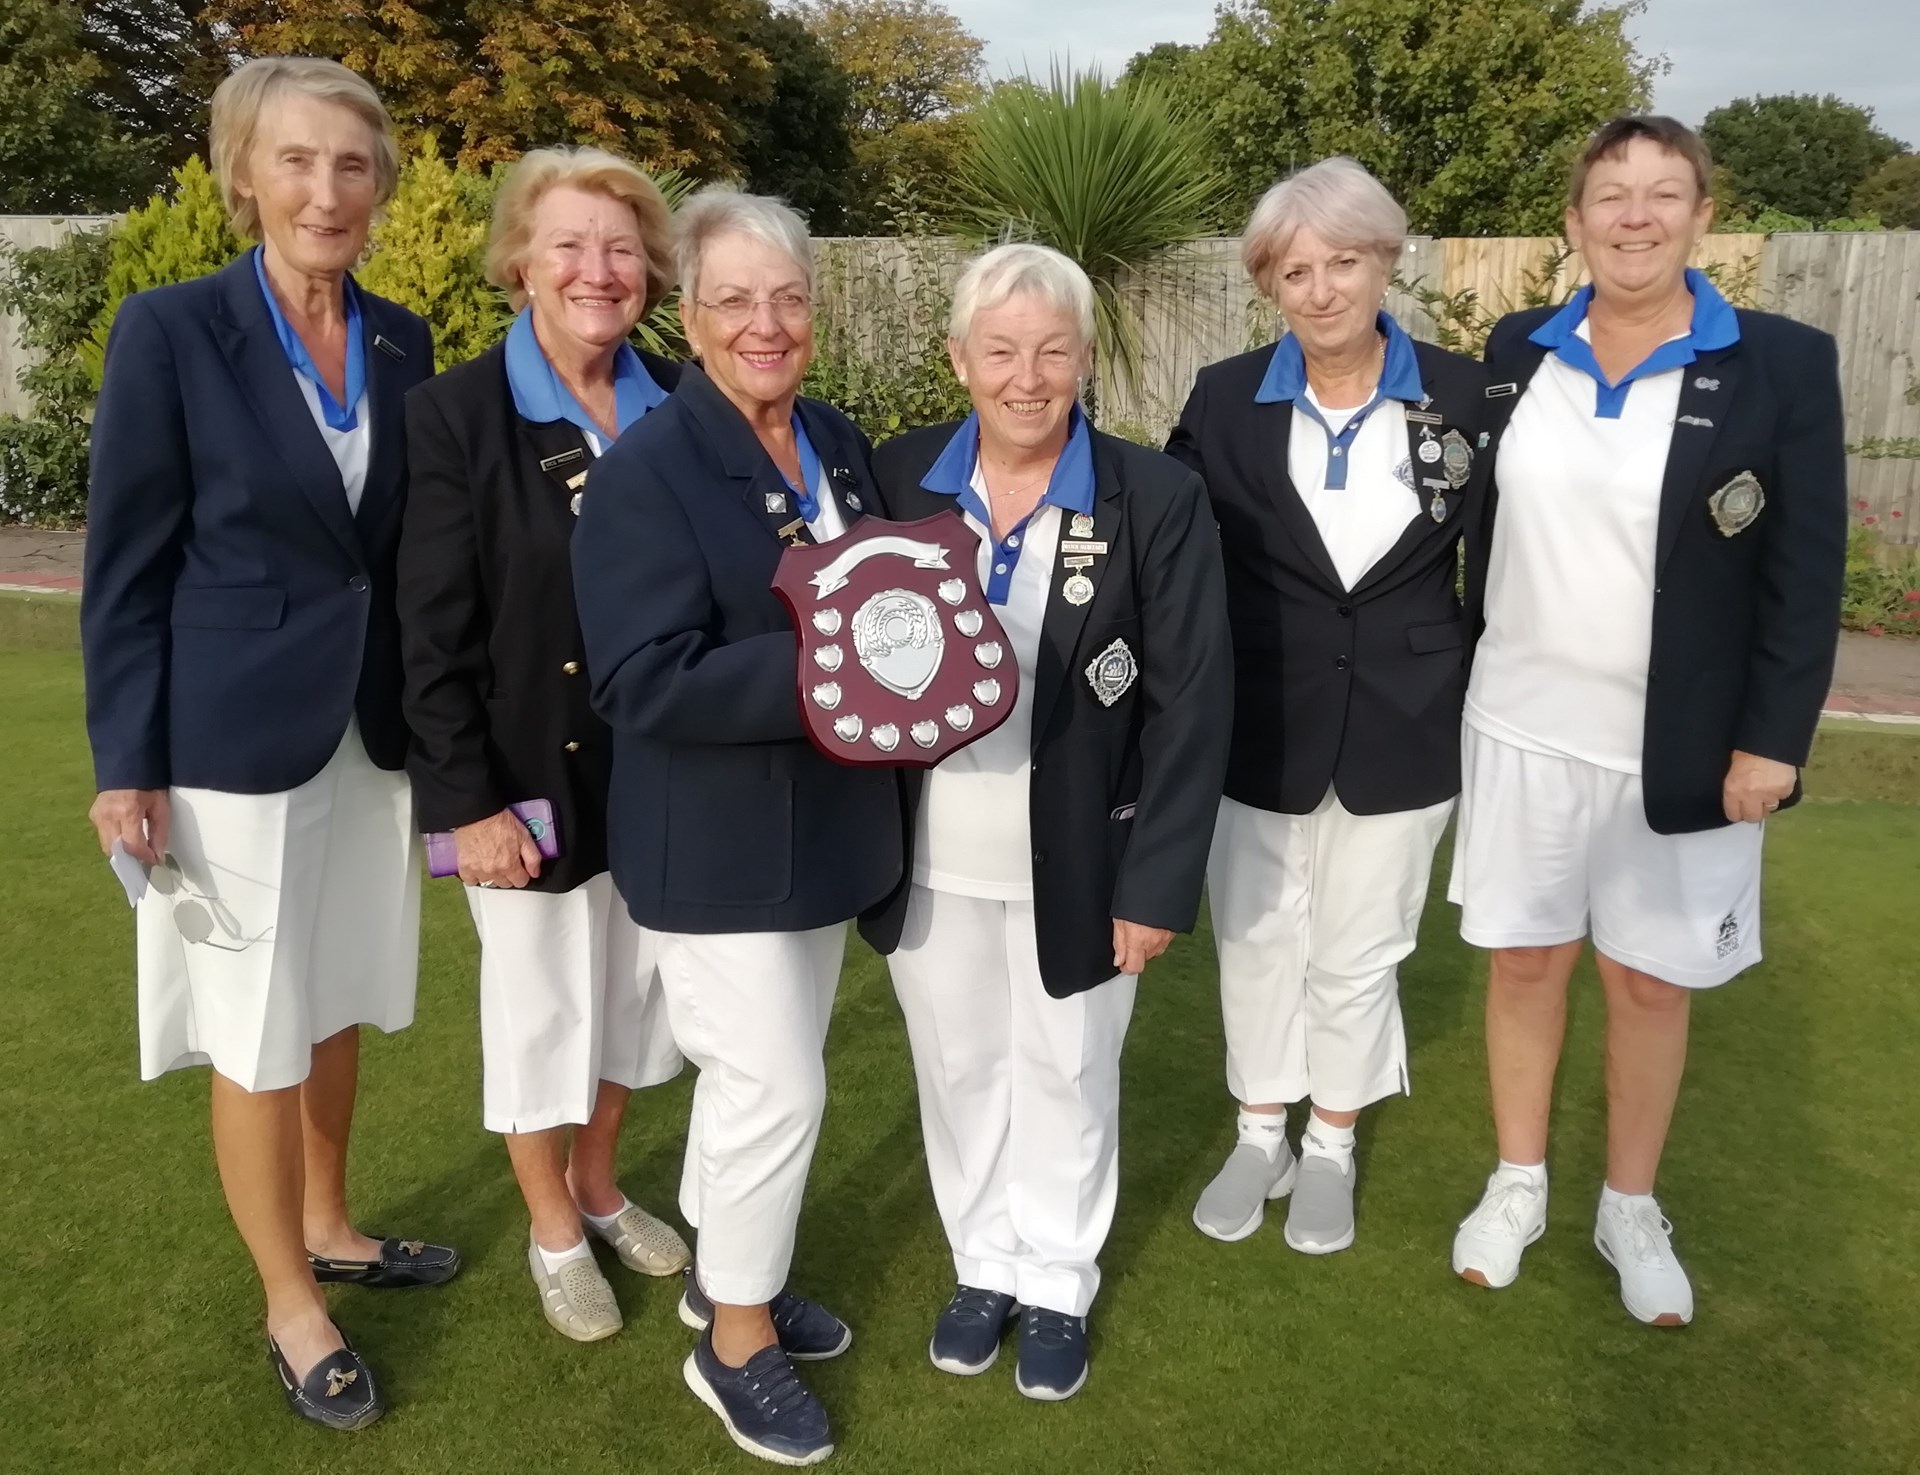 Heron League Players in the Finals Day, from left to right, Patricia Vaz, Barbara McGillicuddy, Chris Murphy, Maggie Porter, Penny Smith and Tracy Hamilton